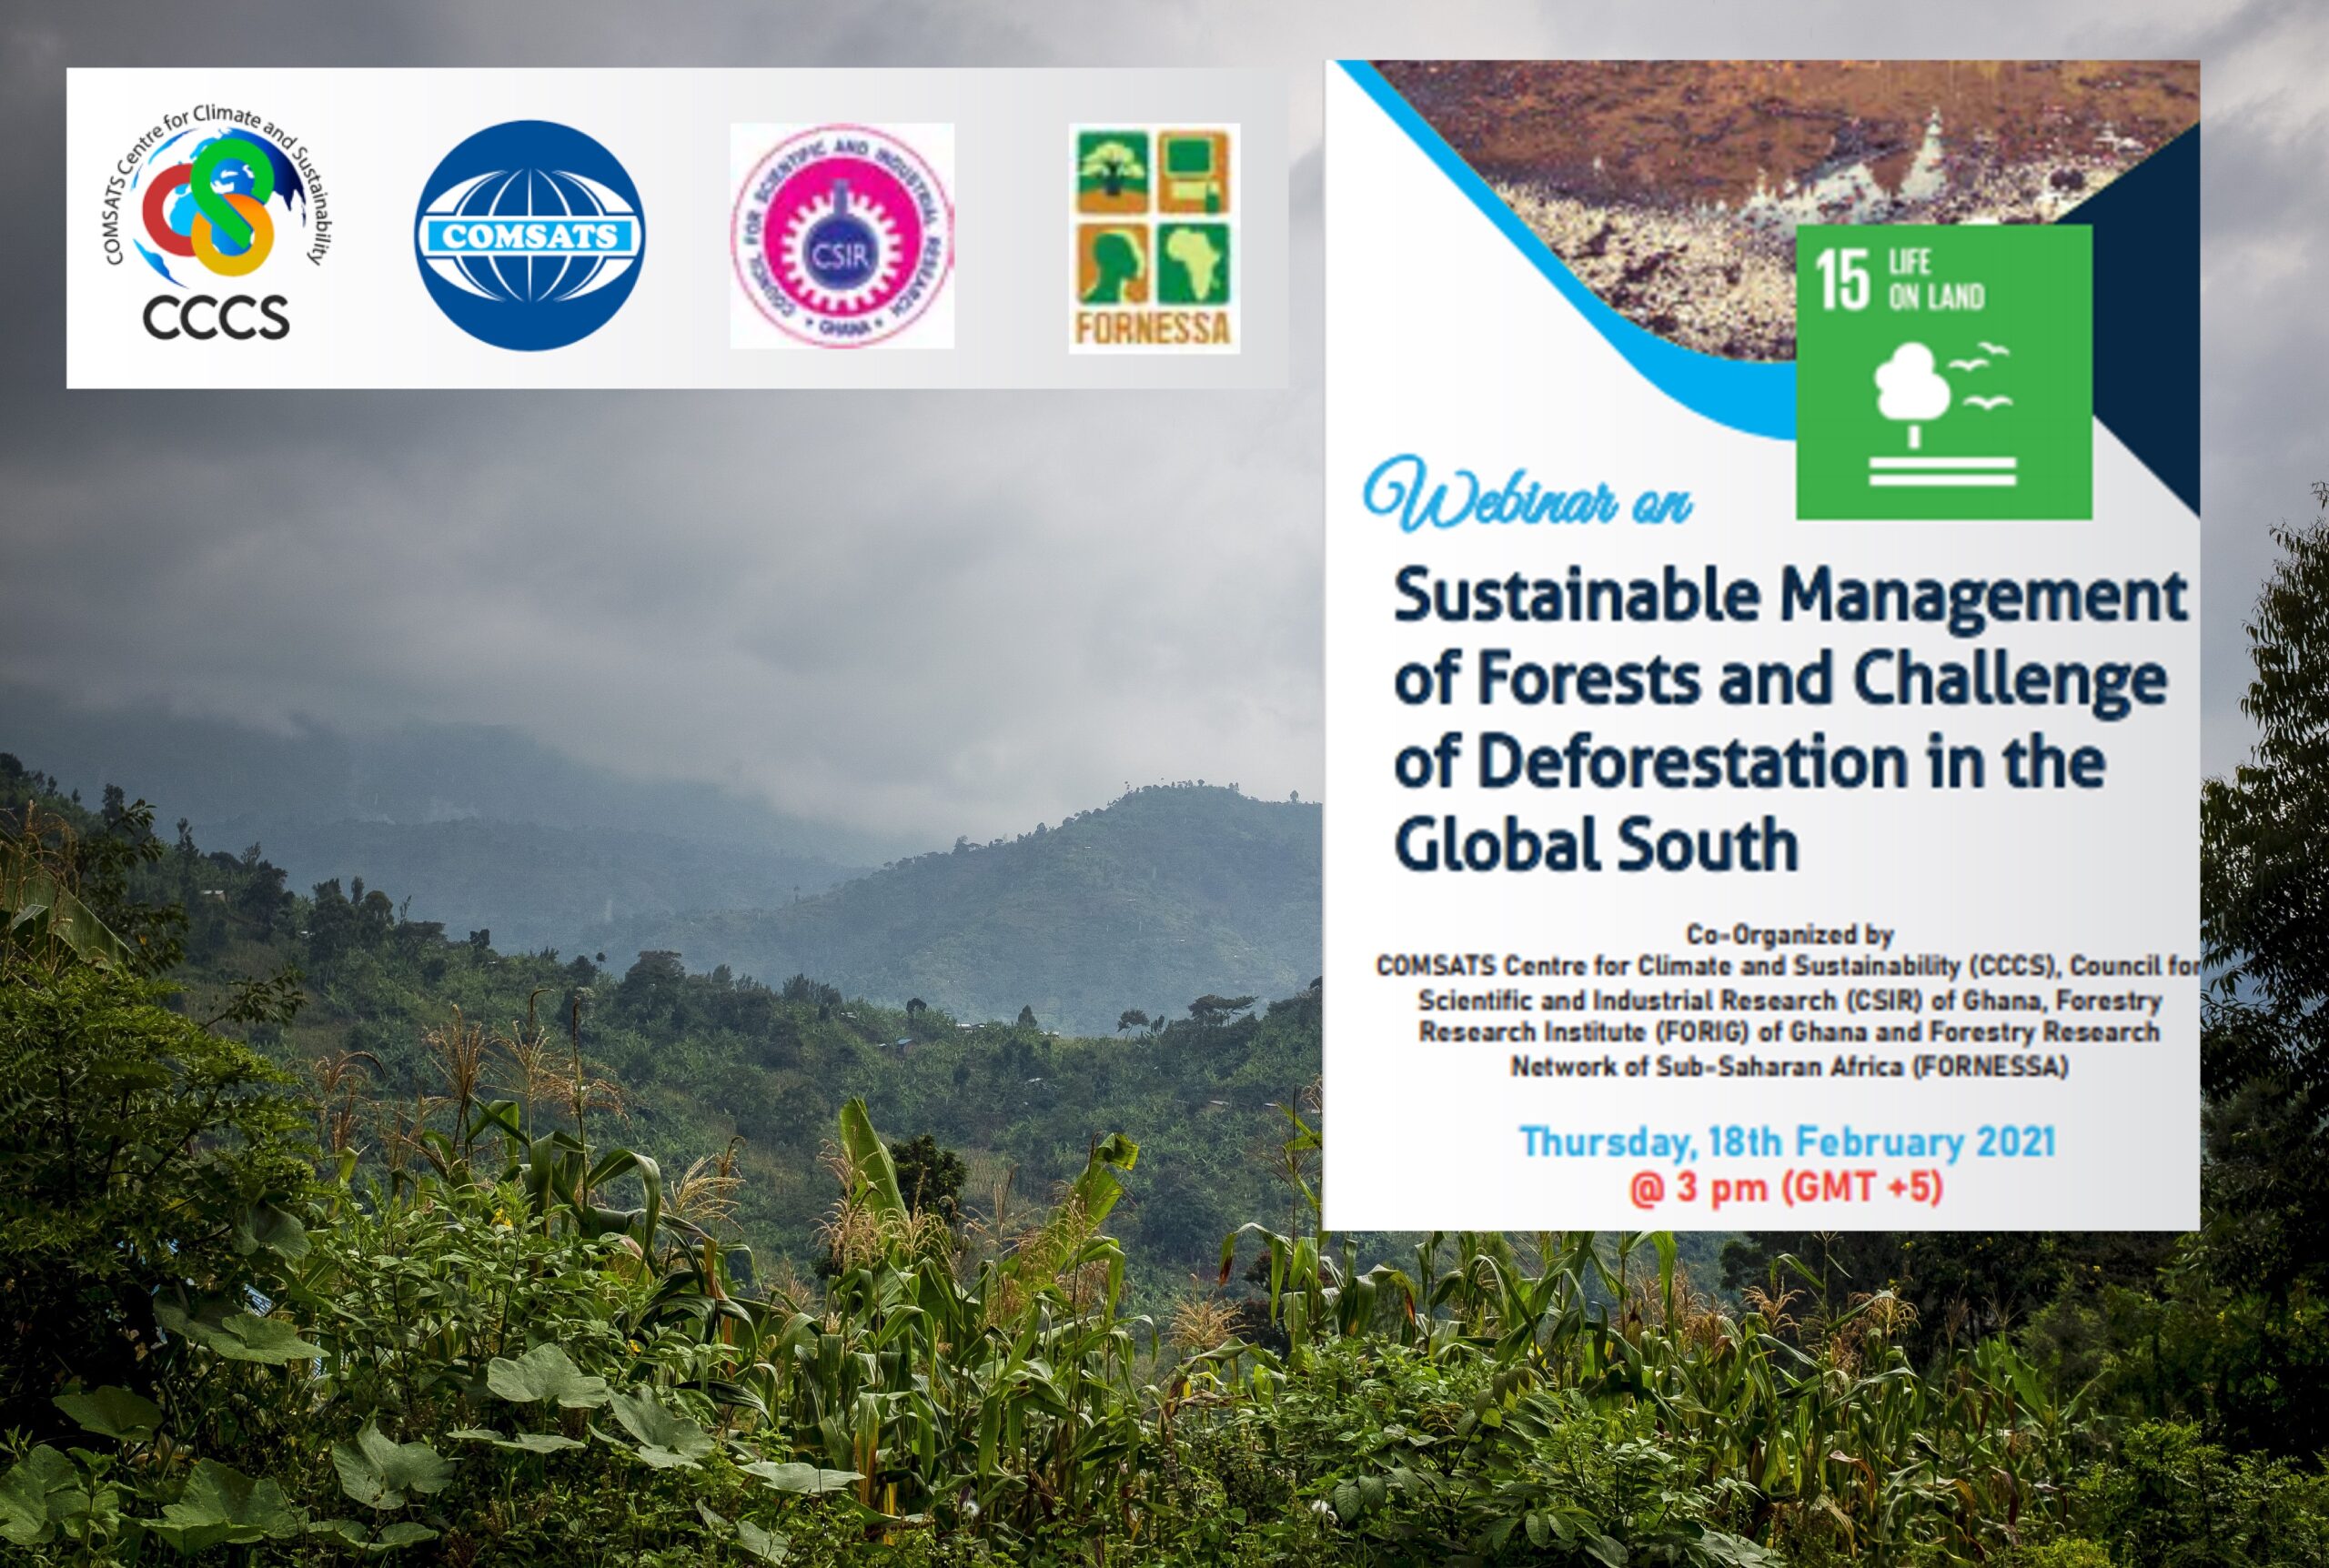 COMSATS Webinar: Sustainable Management of Forests and Challenge of Deforestation in the Global South, 18 February 2021